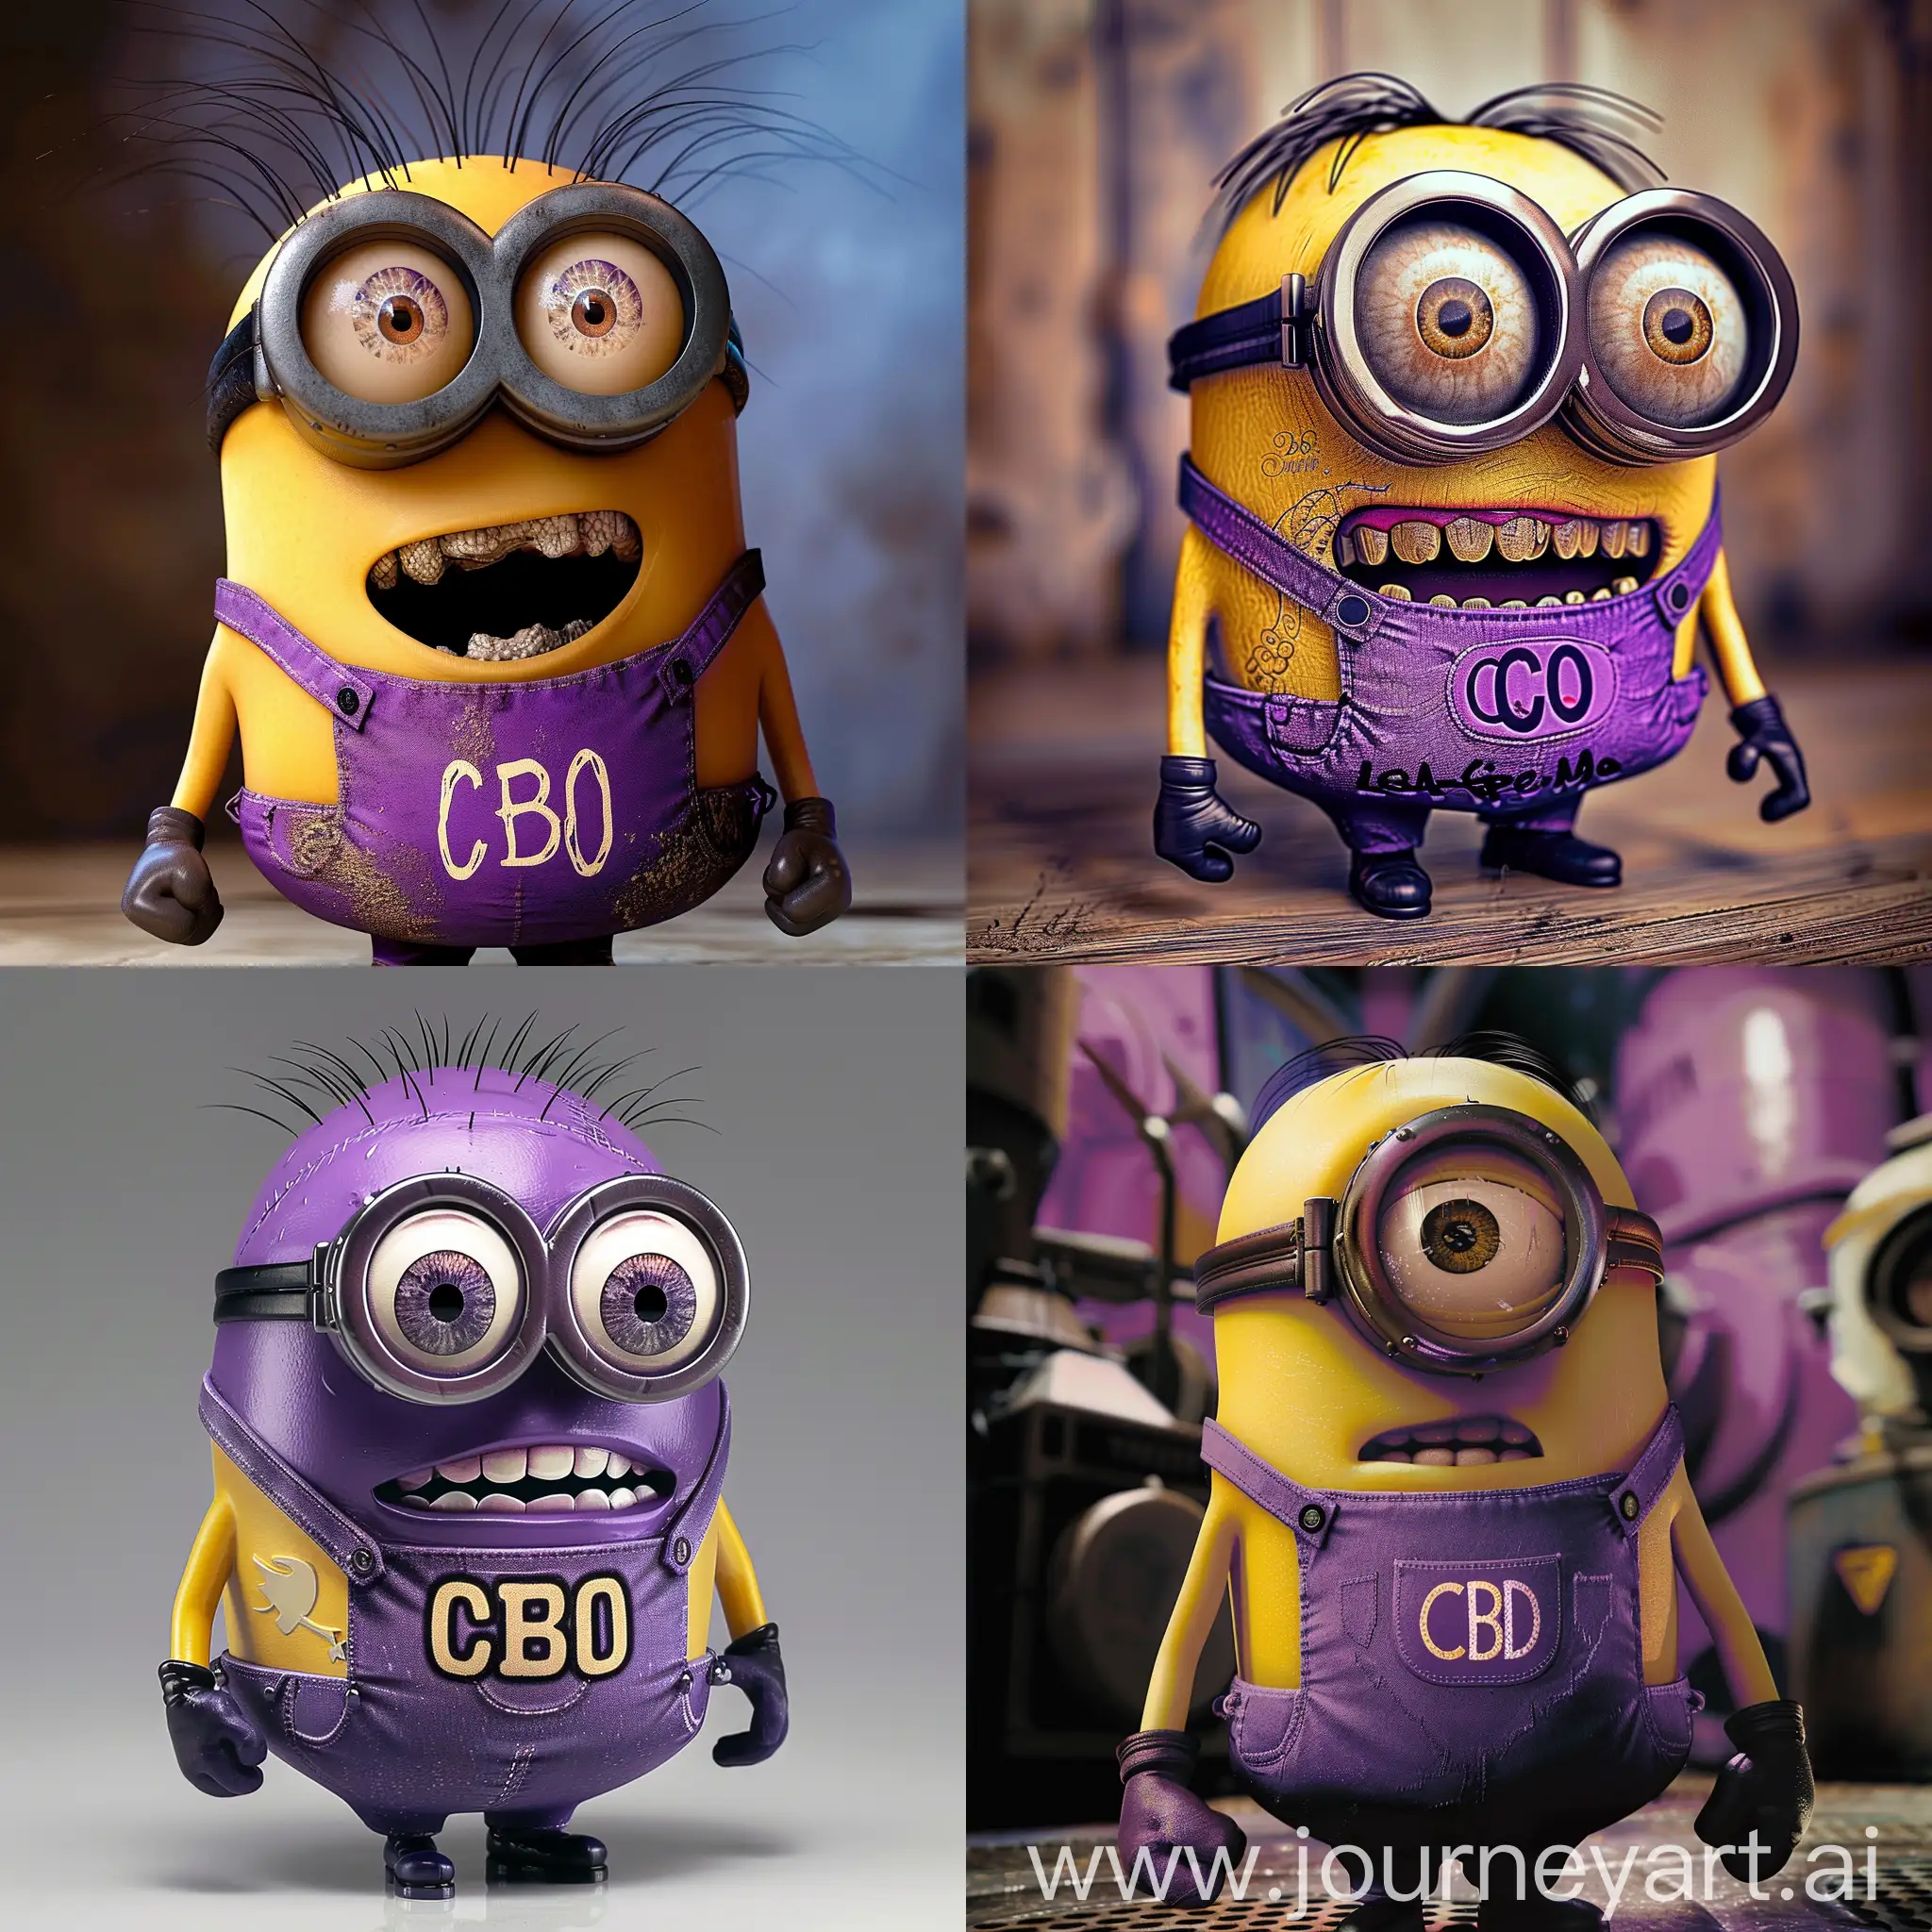 evil purple minion from despicable me in a T-shirt with the inscription CBO